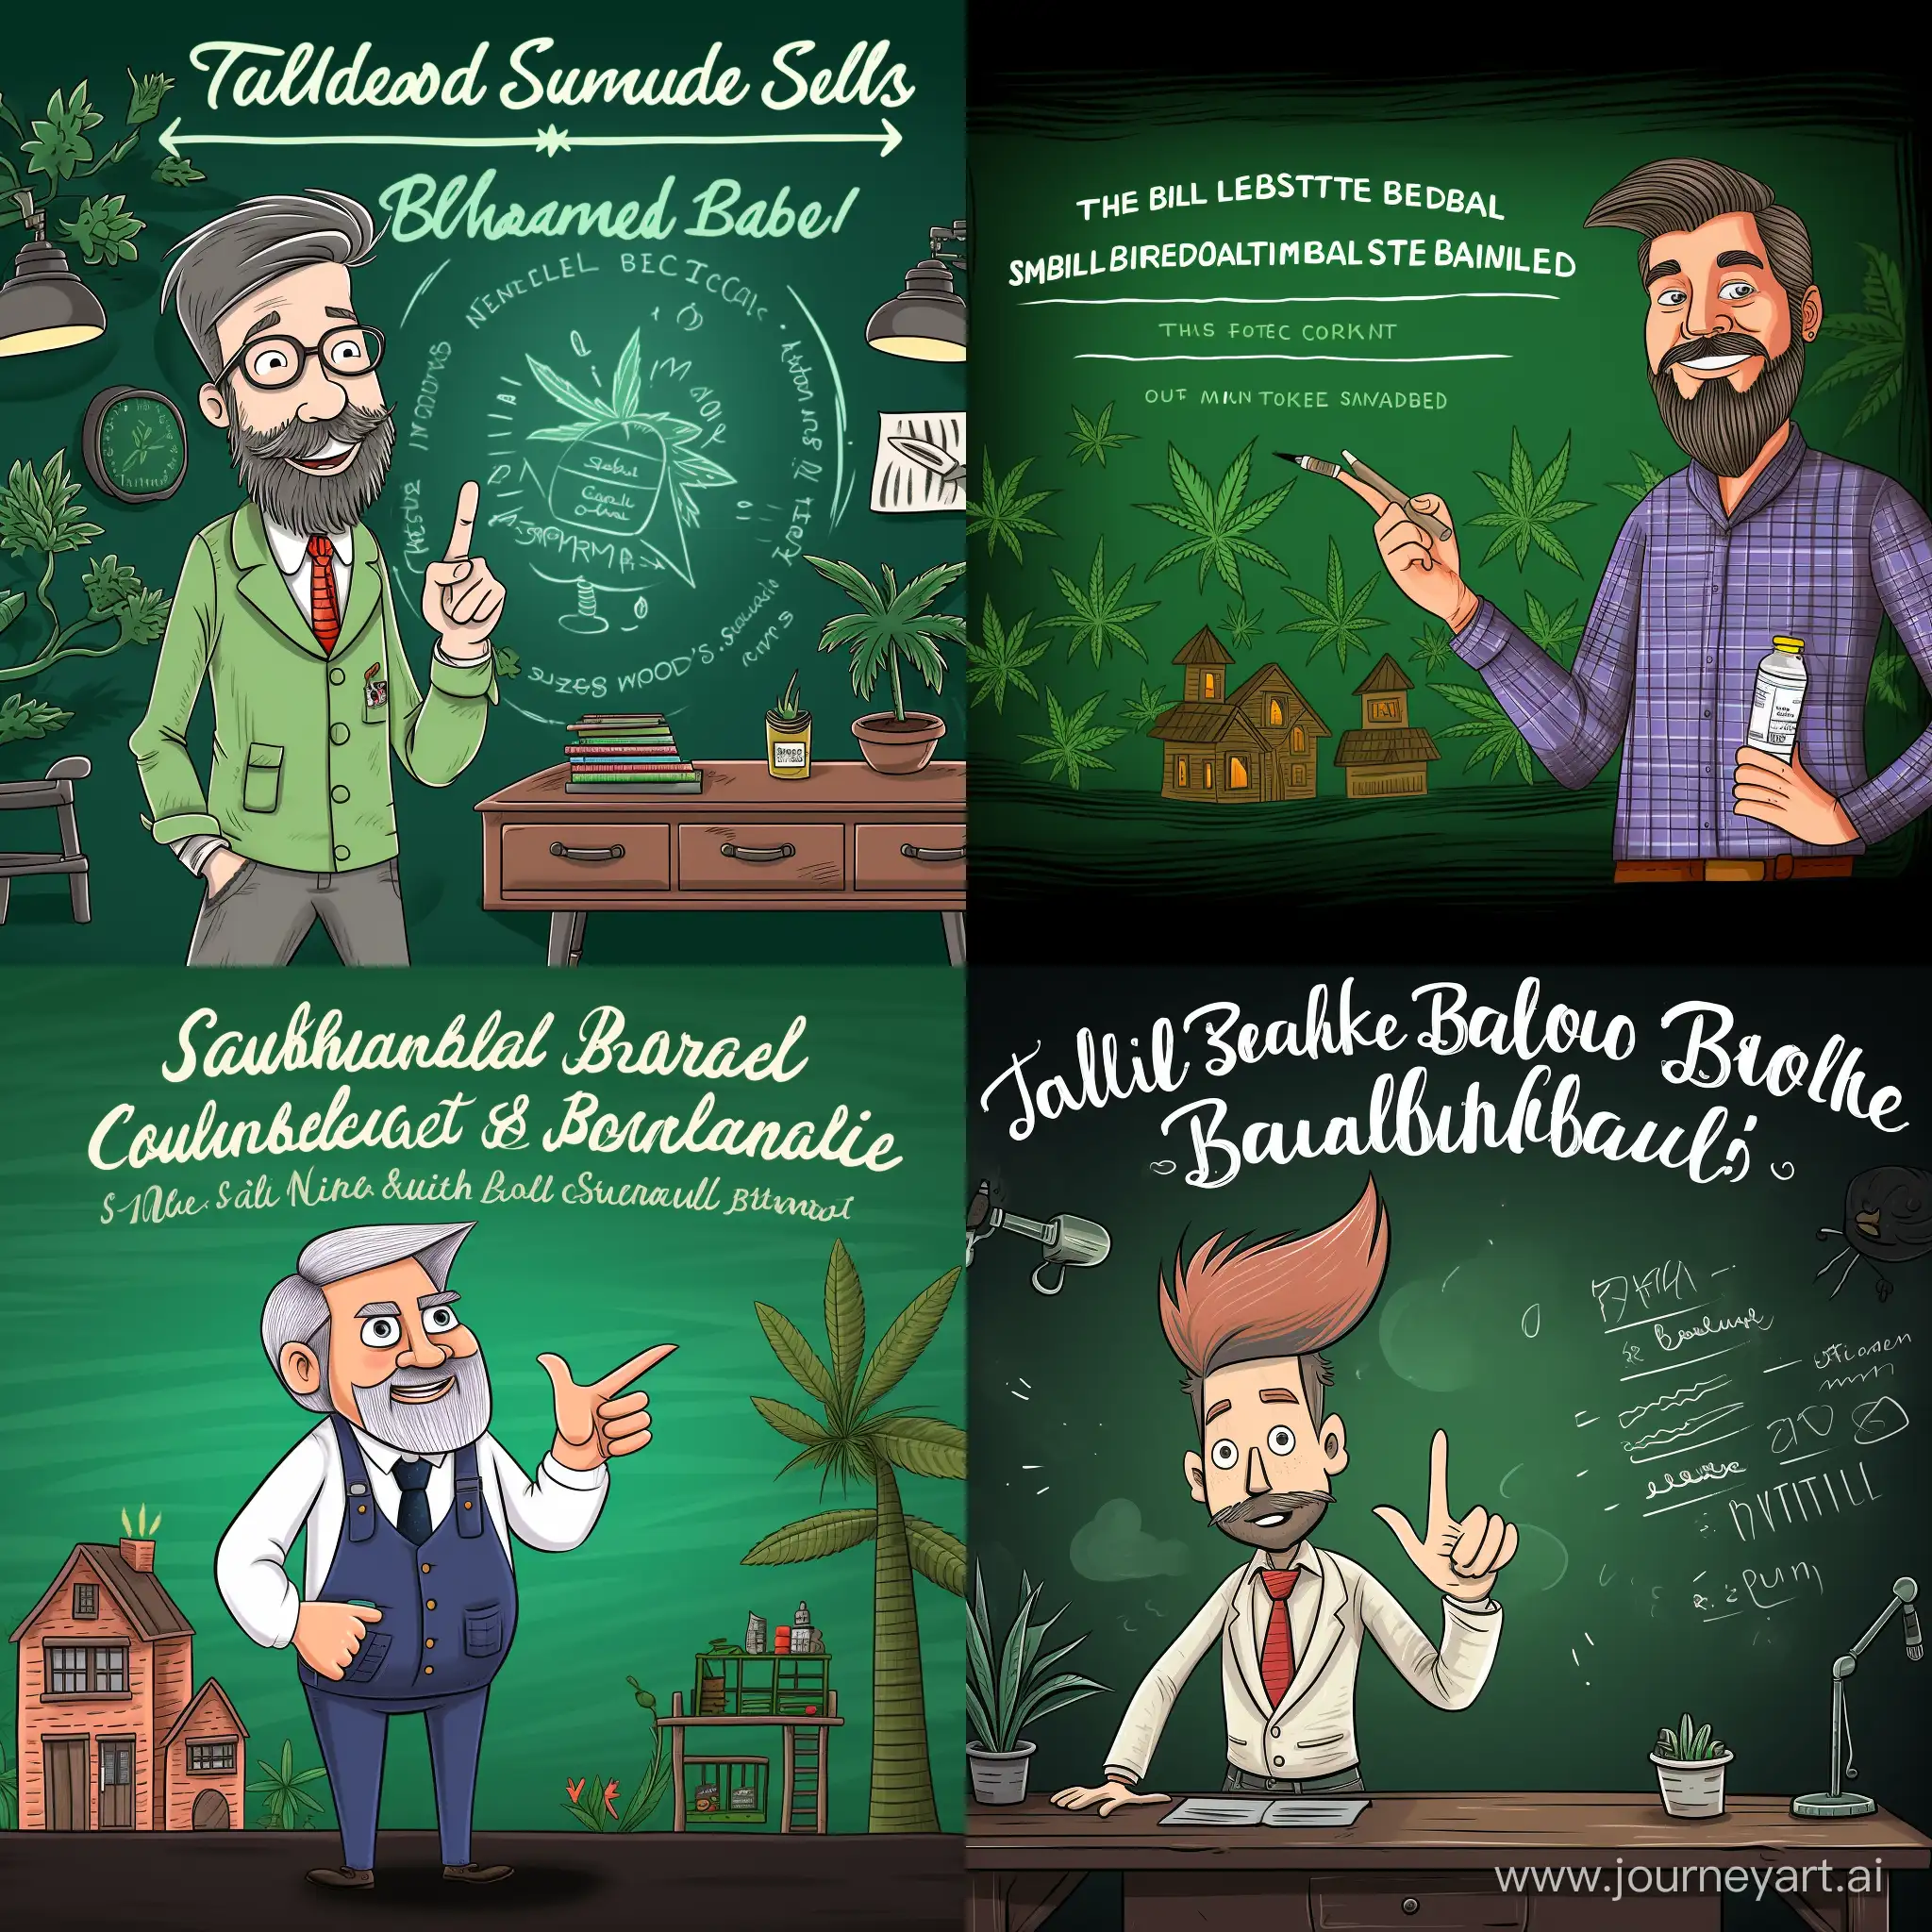 This illustration must depict a cartoon doctor in front of a chalkboard, showcasing cannabis-related information, ideal for promoting your medical-themed YouTube channel. friendly and inviting expression of the doctor and educational elements on the chalkboard, doctor pointing to a YouTube icon on the chalkboard, with the words "Subscribe" written on board too